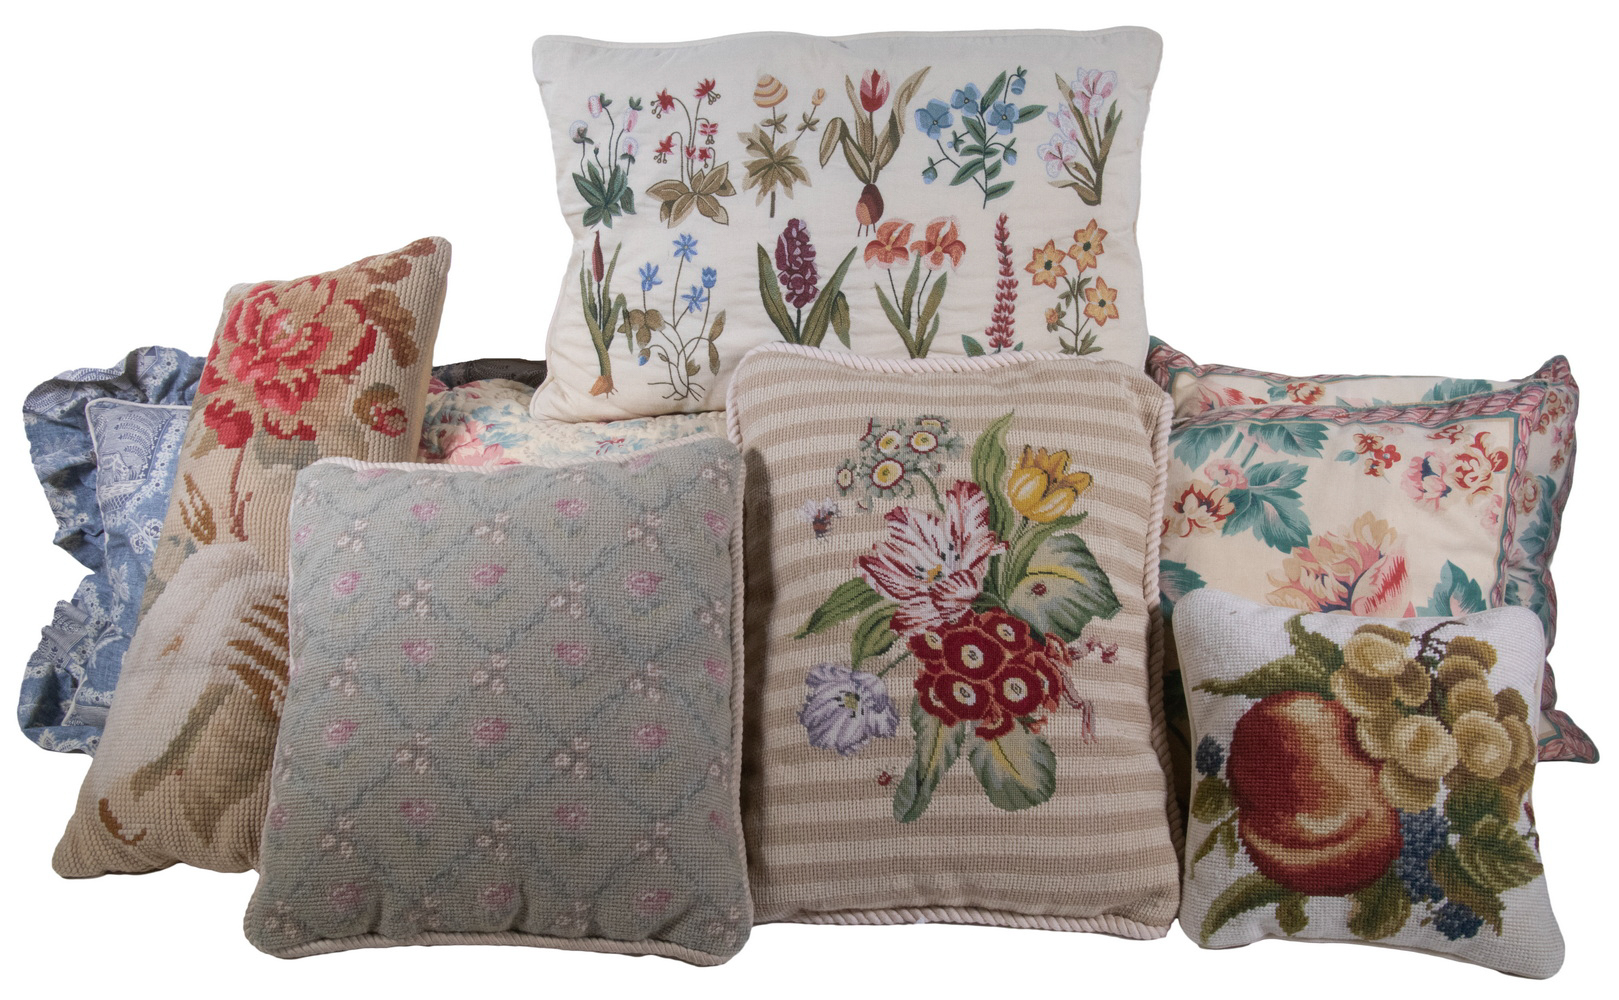 COLLECTION OF QUALITY THROW PILLOWS 302858